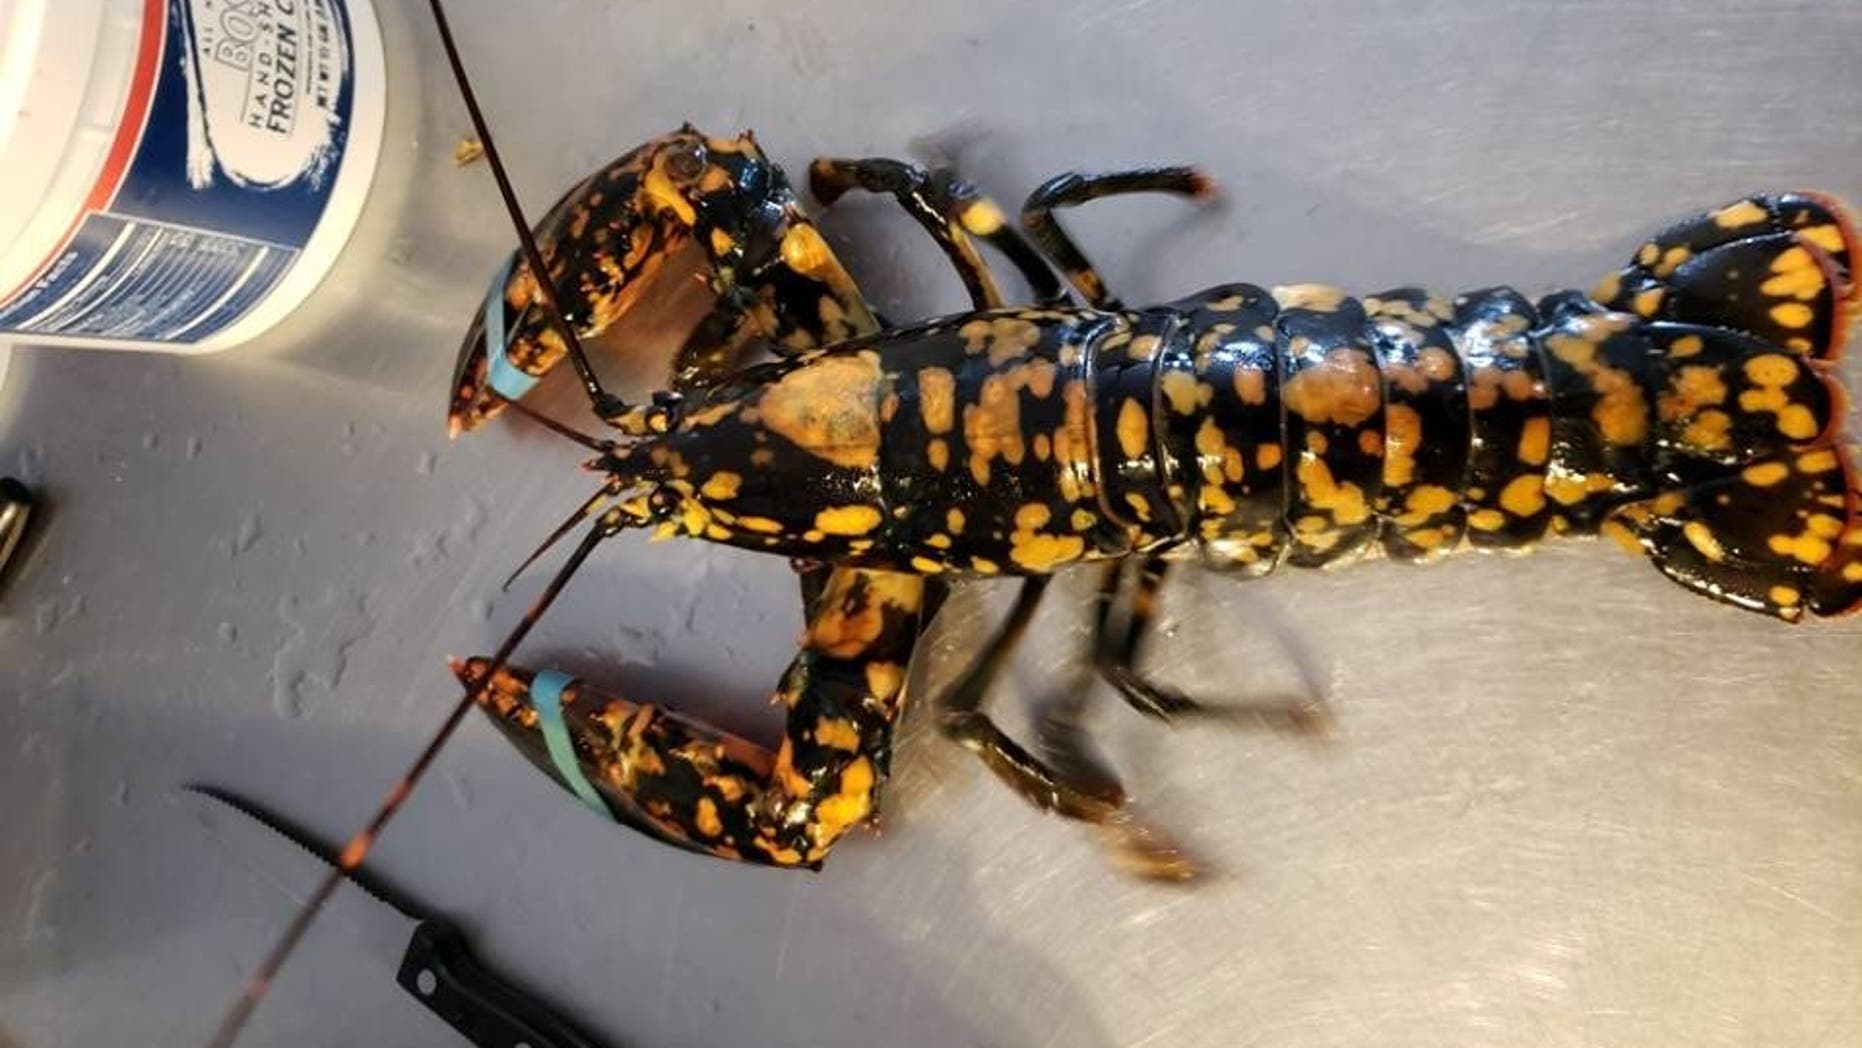 The University of Maine's Lobster Institute estimated the odds of finding a calico lobster are 1 in 30 million.